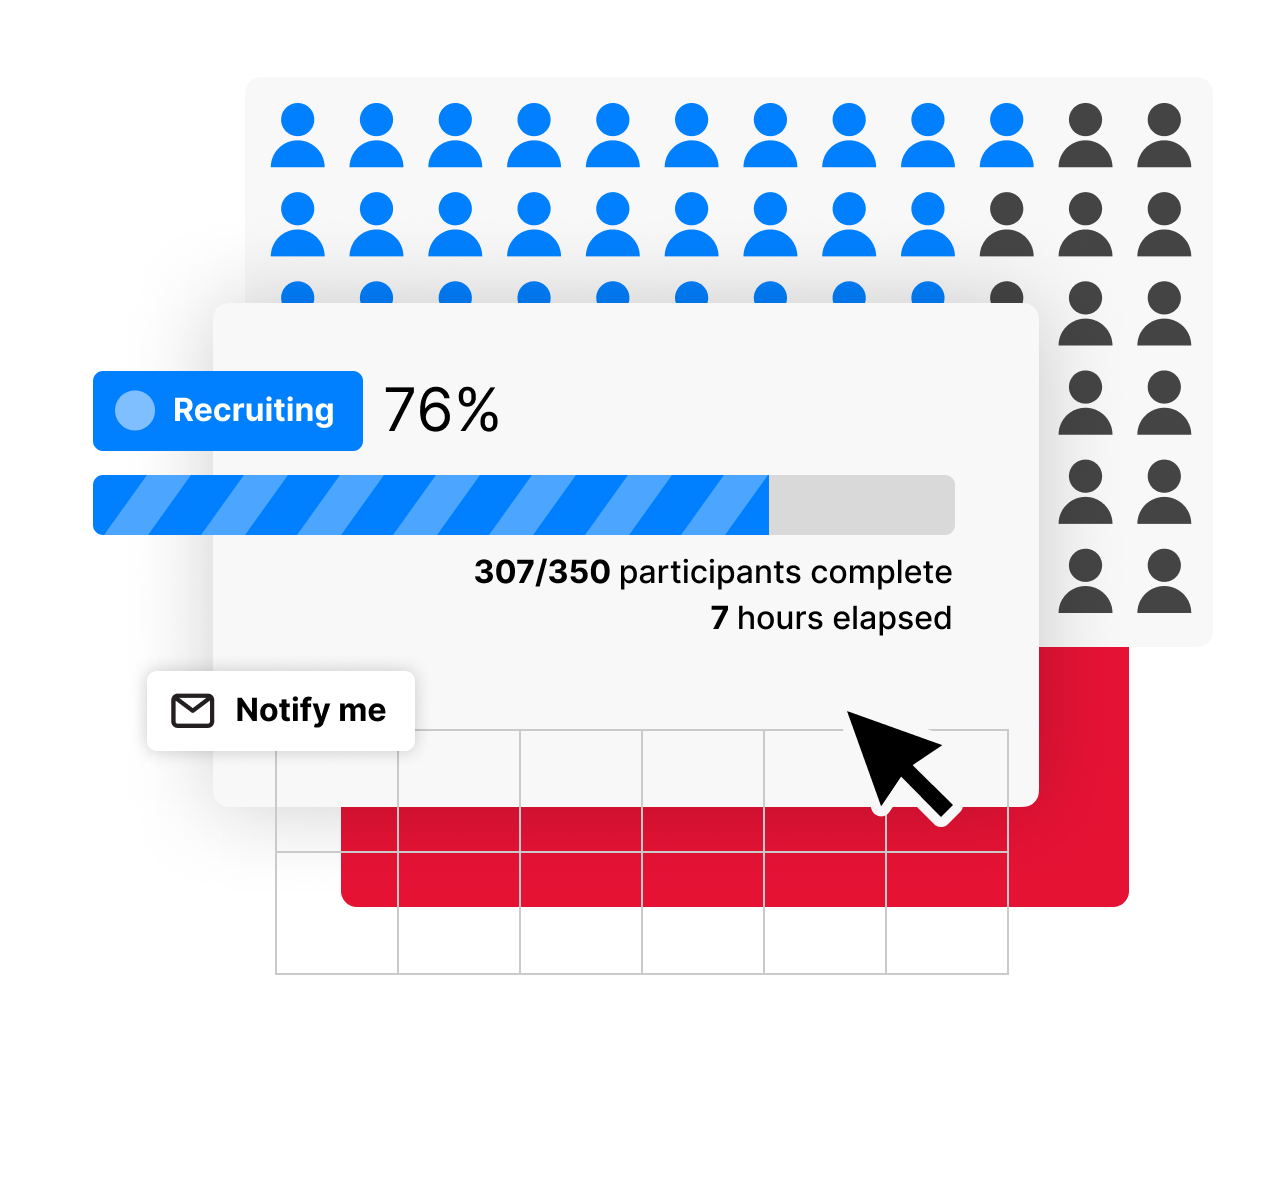 Infographic demonstrating recruiting large samples of participants, with clear indication of recruitment process, and email notifications on completion.